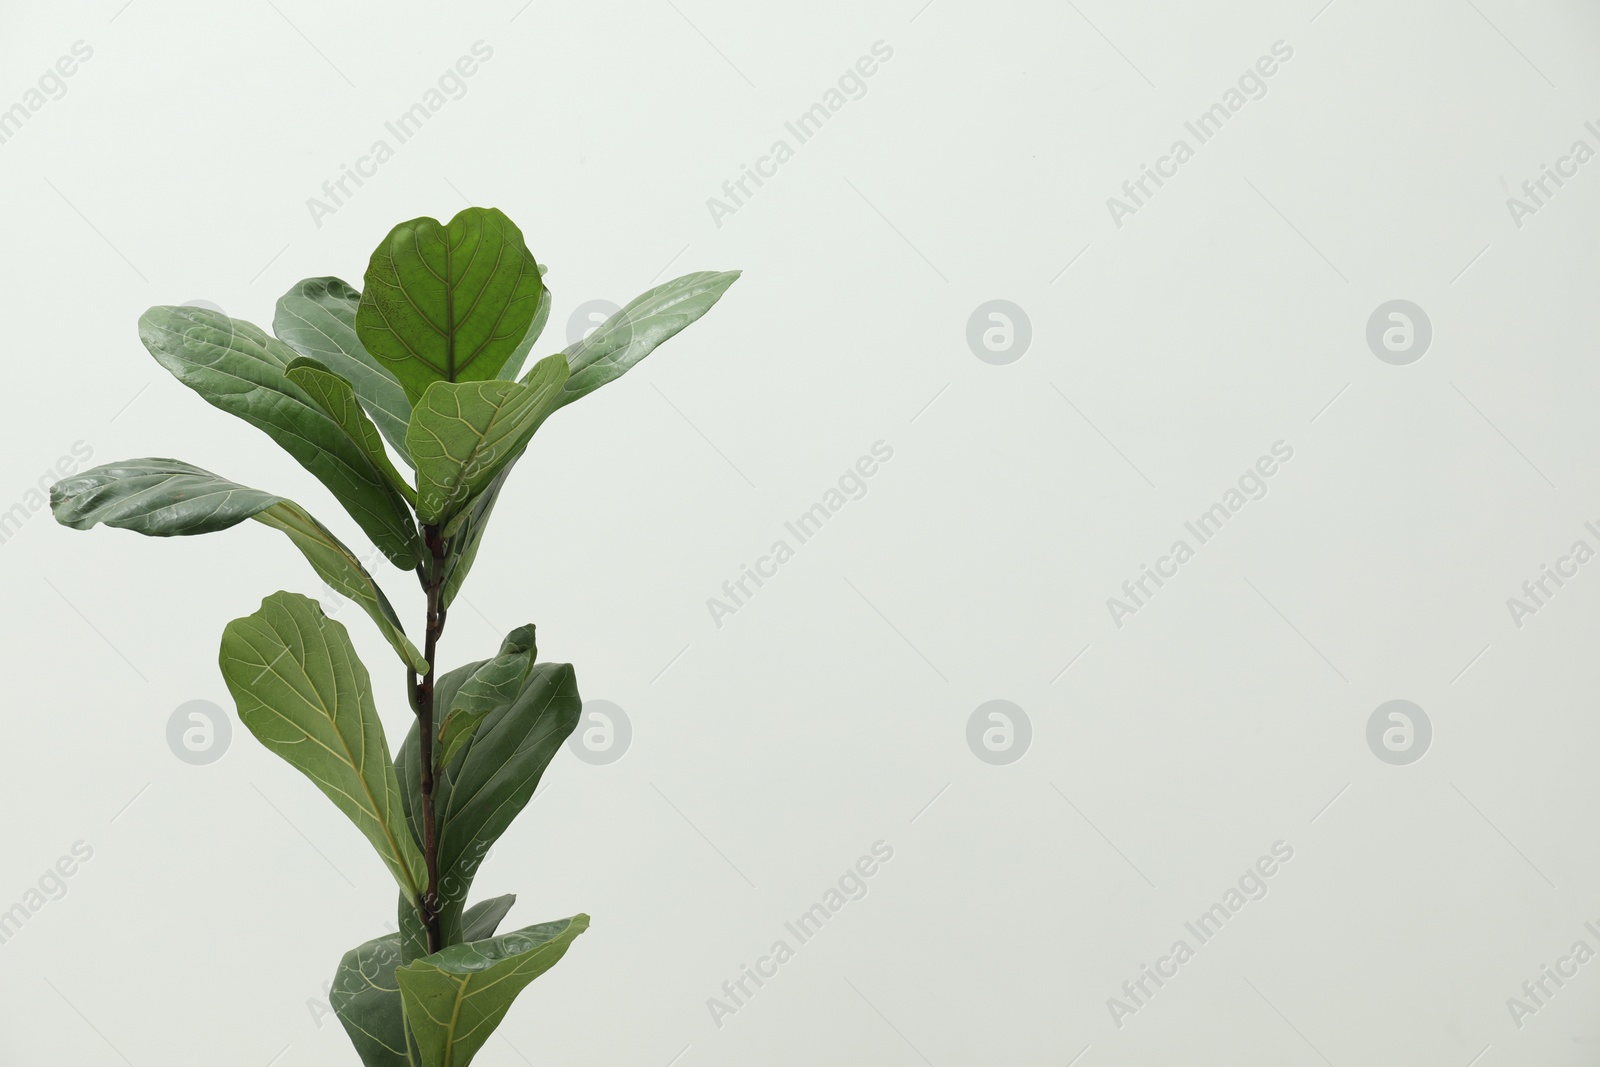 Photo of Fiddle Fig or Ficus Lyrata plant with green leaves on light background. Space for text